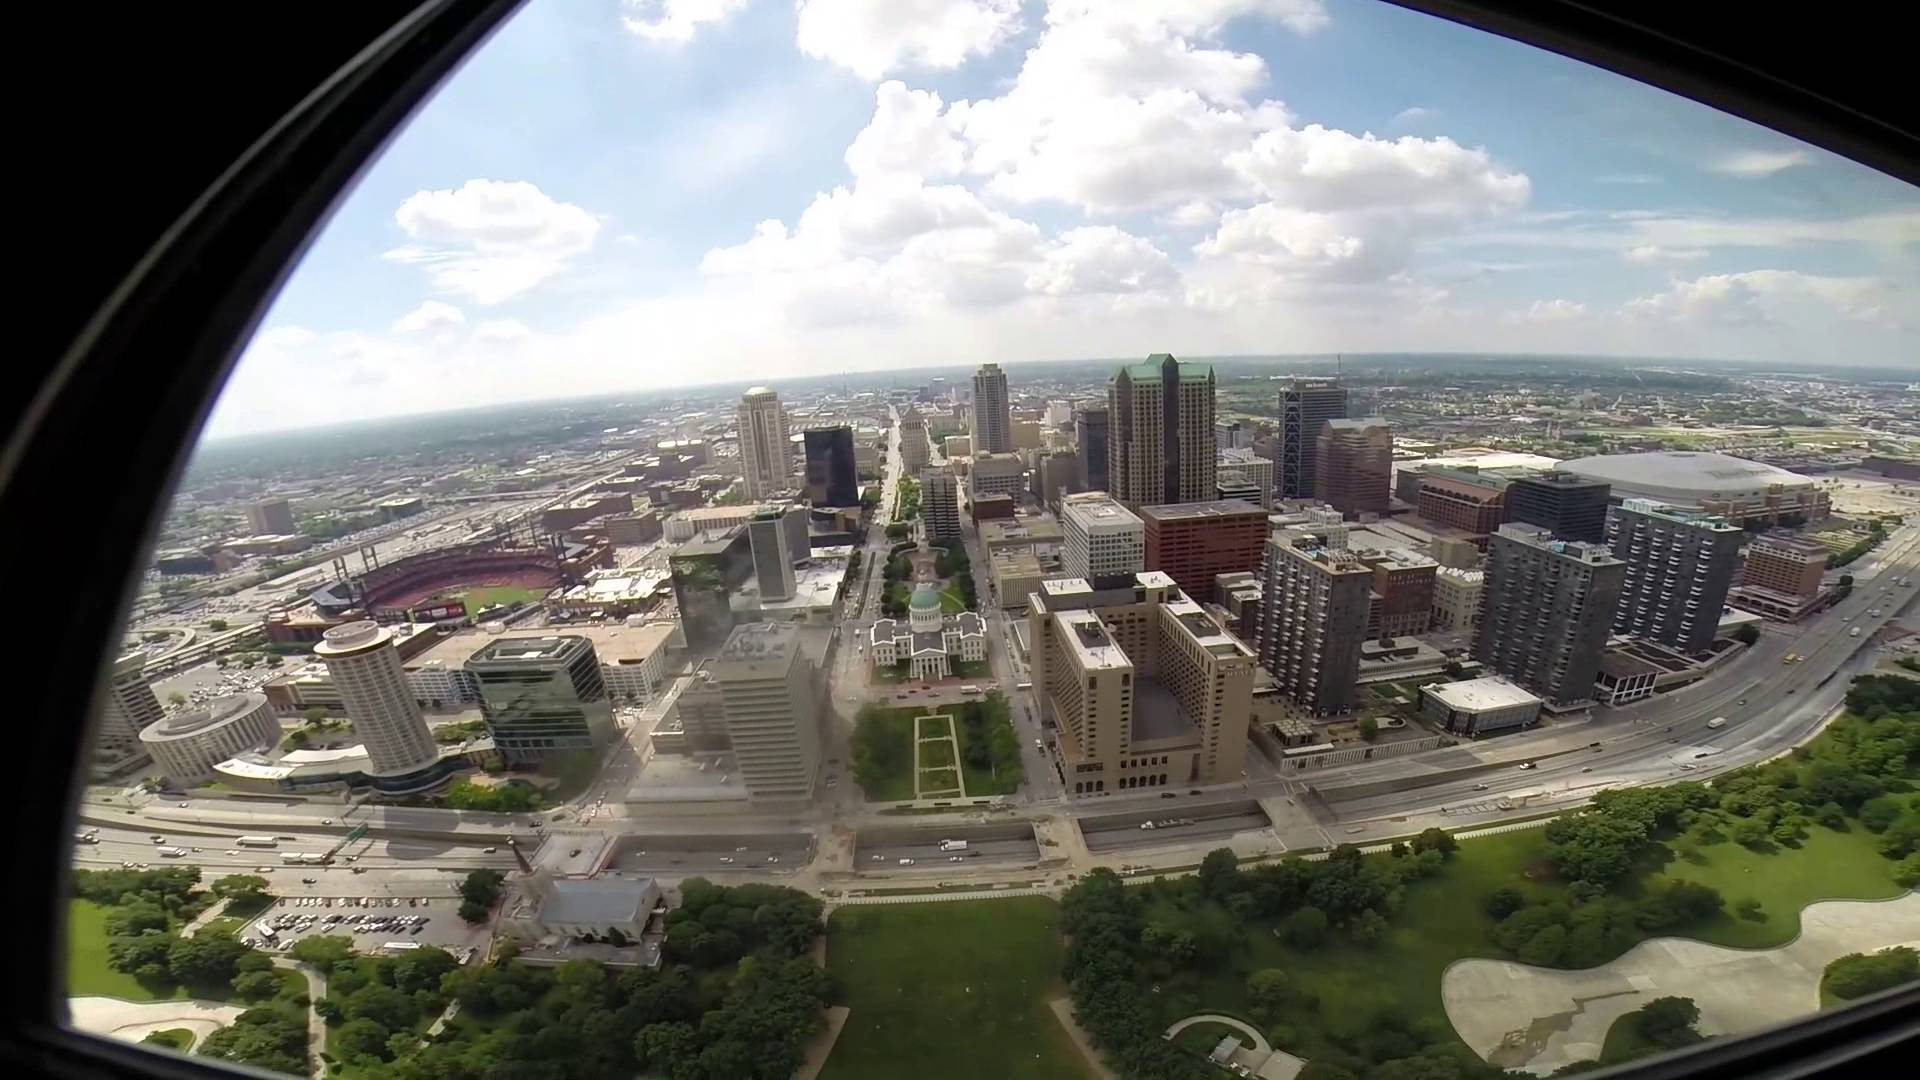 Inside the St. Louis Arch on May 29, 2014 - YouTube